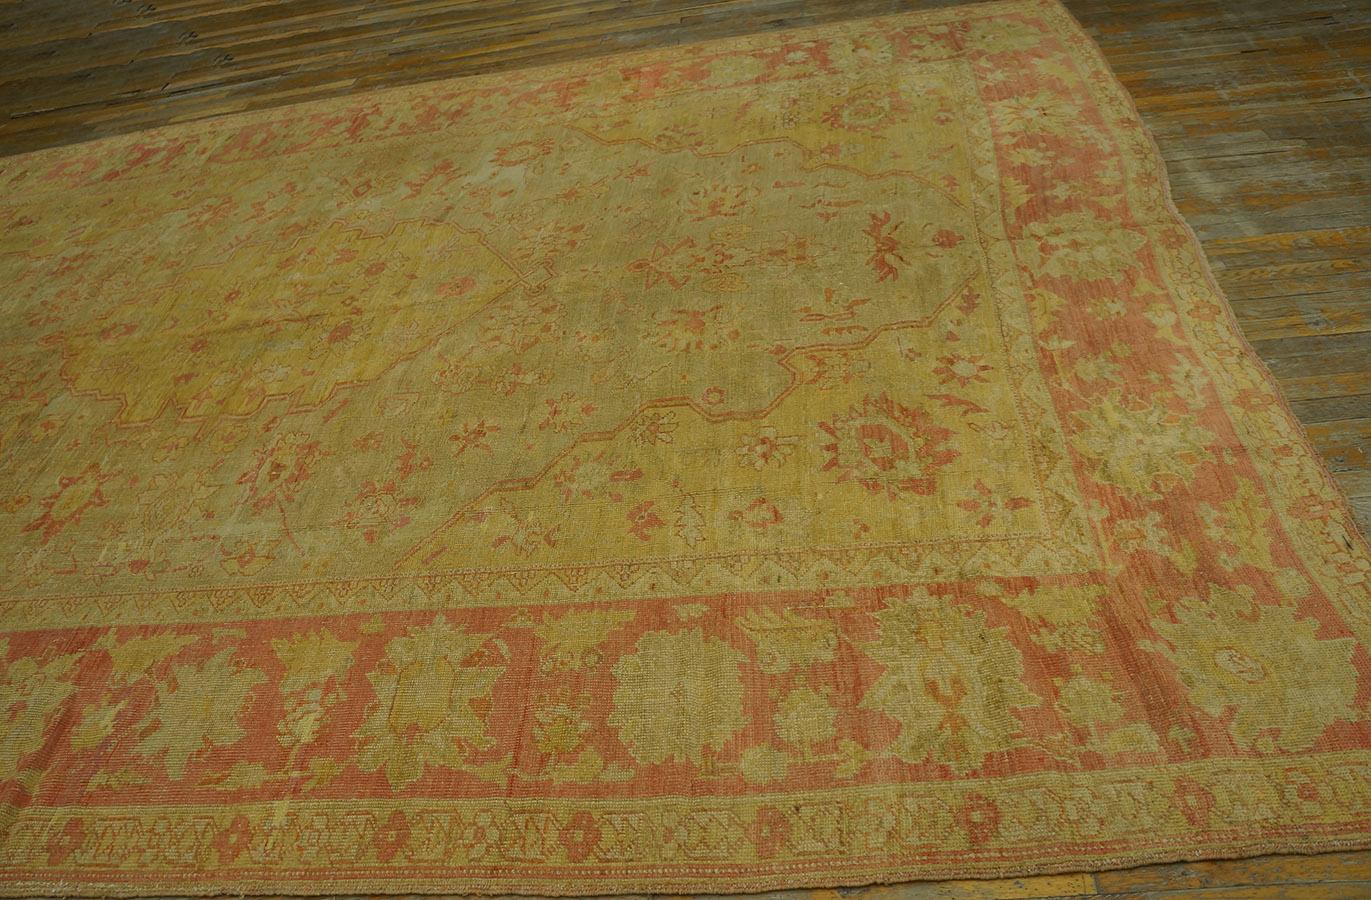 Early 20th Century 19th Century Turkish Oushak Carpet ( 9'2'' x 13'8'' - 280 x 416 ) For Sale